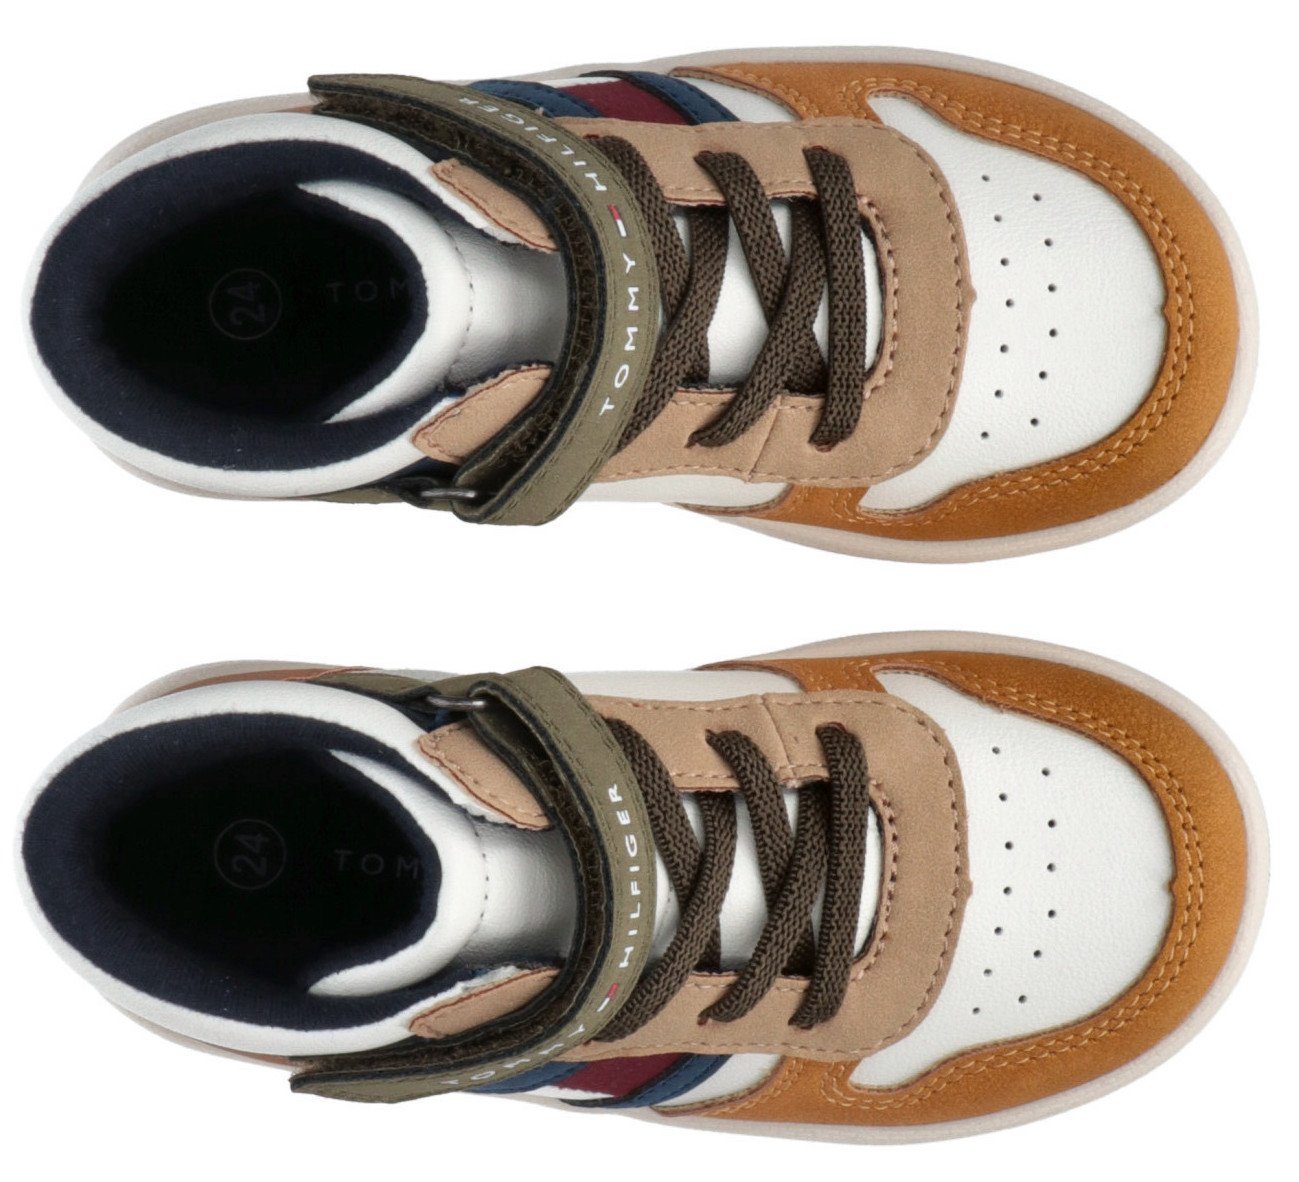 Tommy Hilfiger FLAG HIGH TOP SNEAKER colorblocking Sneaker Look im modischen LACE-UP/VELCRO